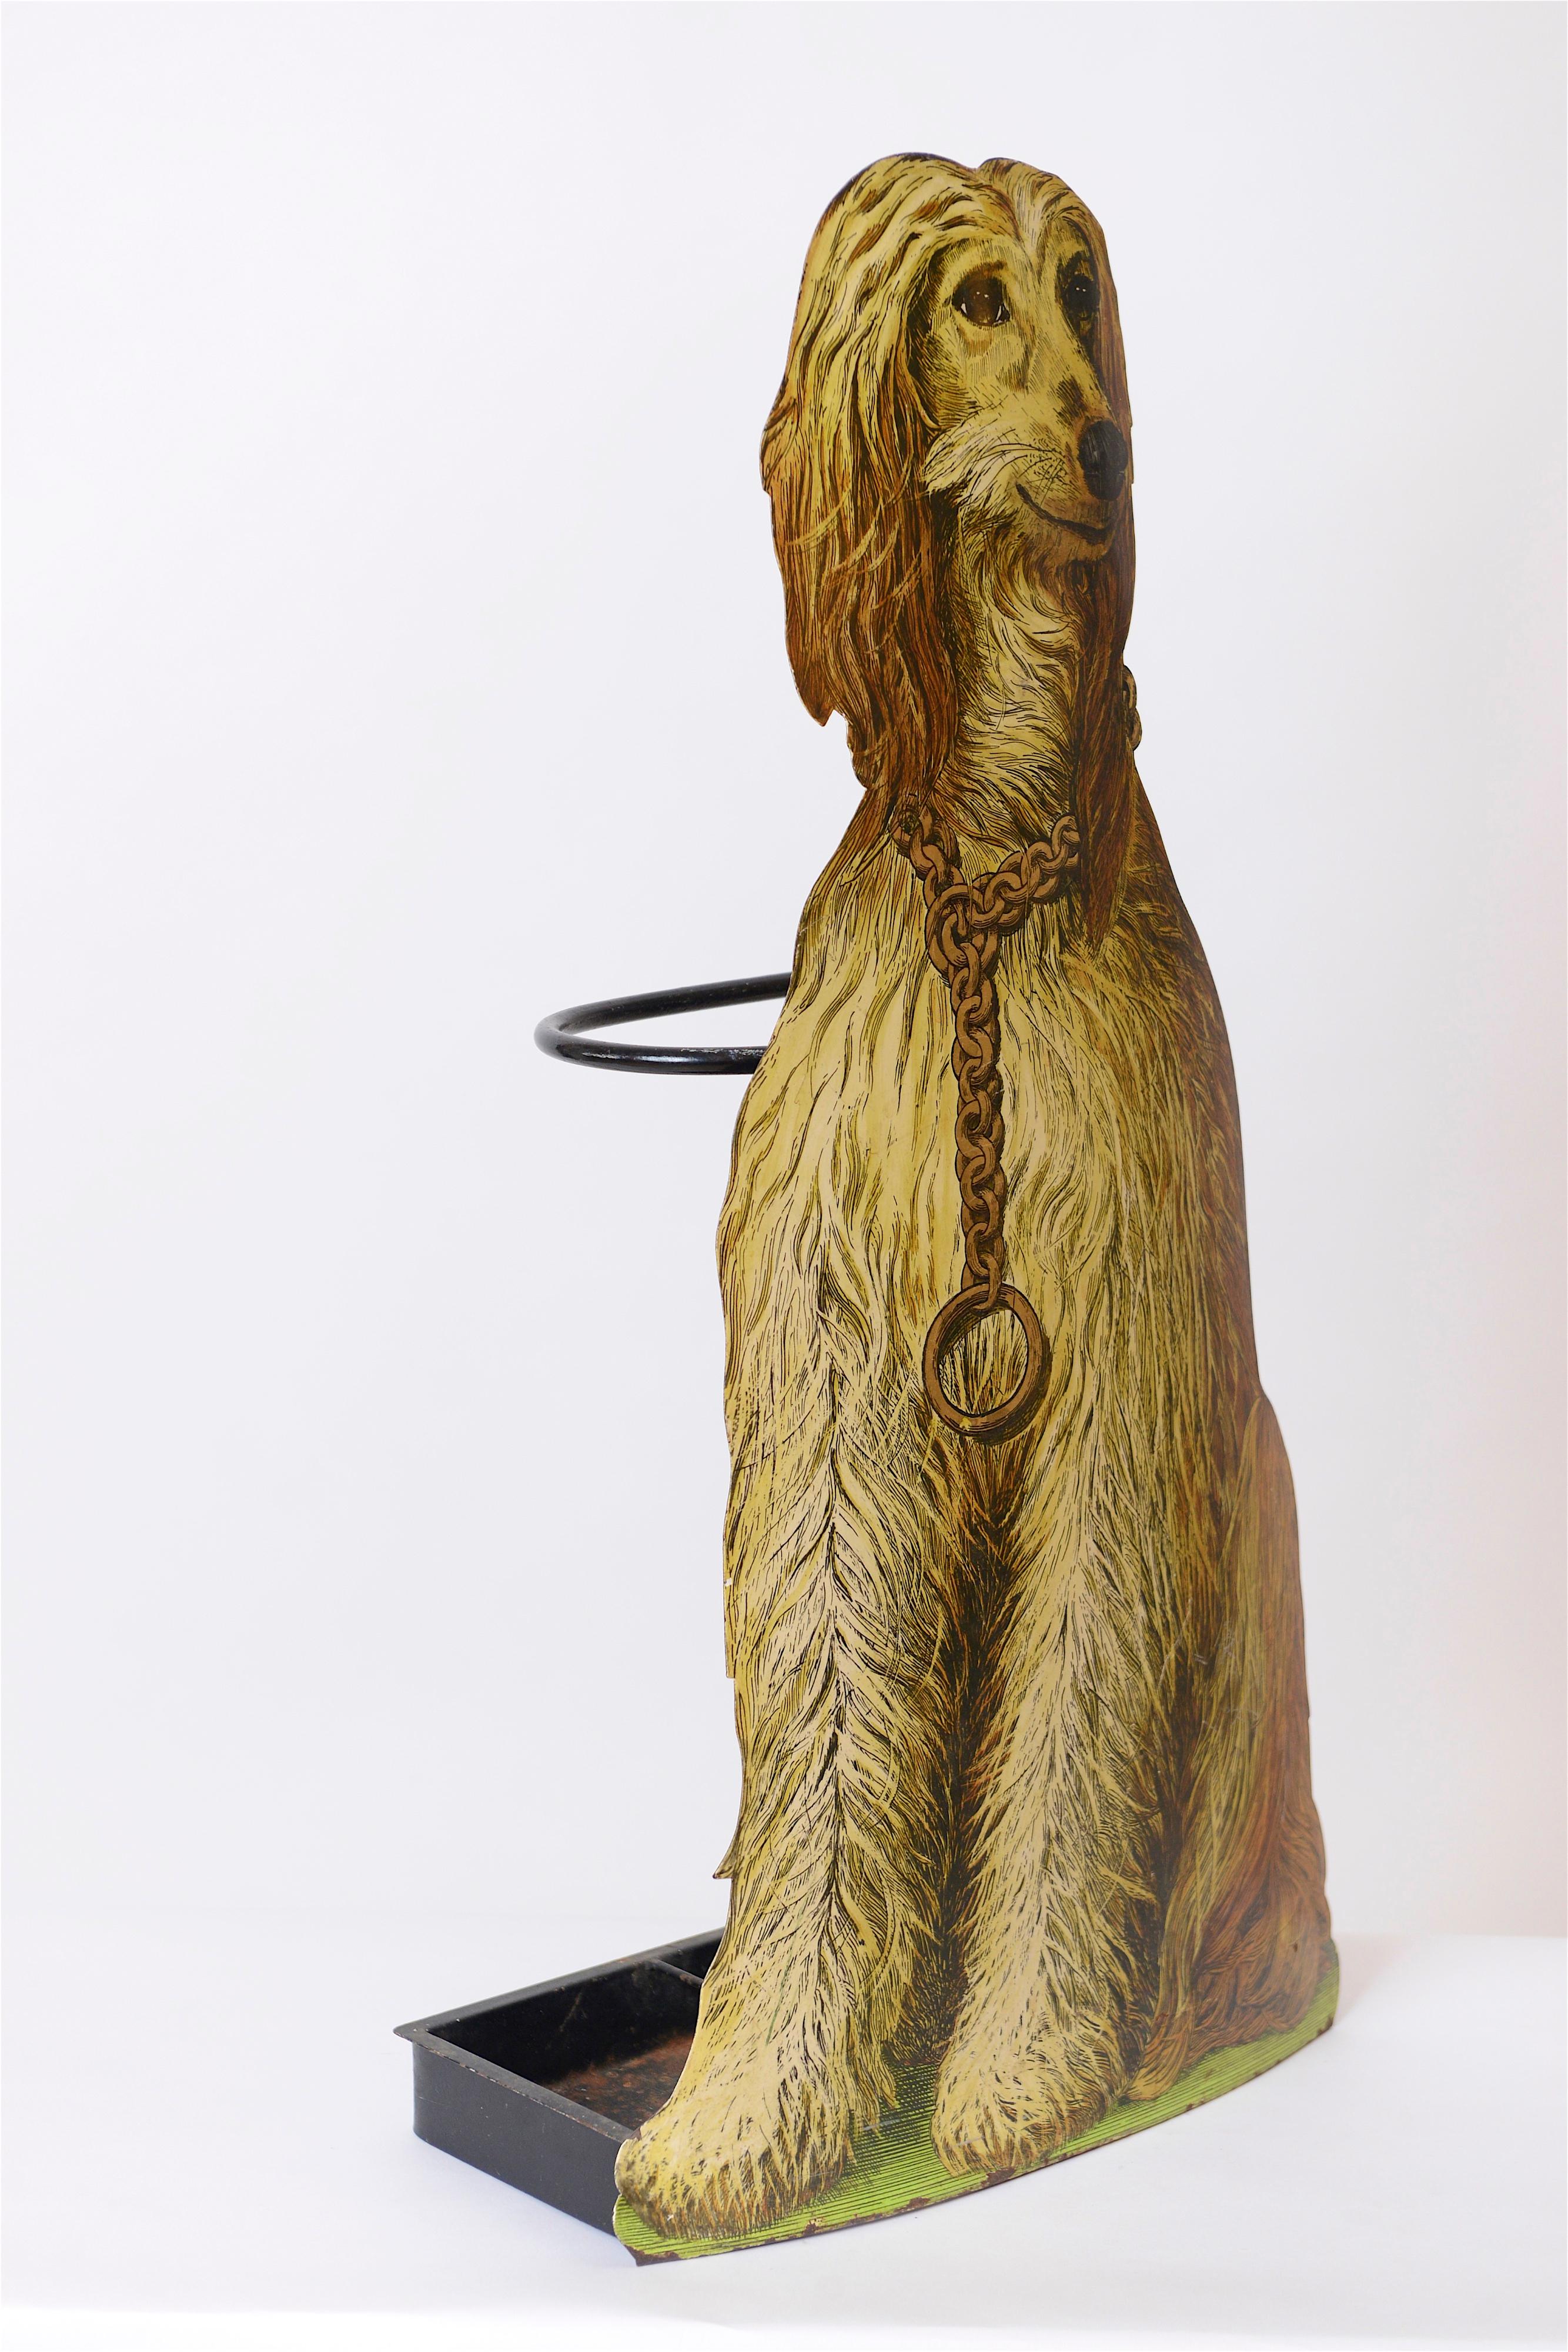 A 1960s ‘Afghan Hound’ umbrella stand by the incredibly creative, Piero Fornasetti. One of eight trompe l’oeil dog umbrella stands he created, this slender, long haired canine is portrayed in a seated position, sporting a large gold neck chain.